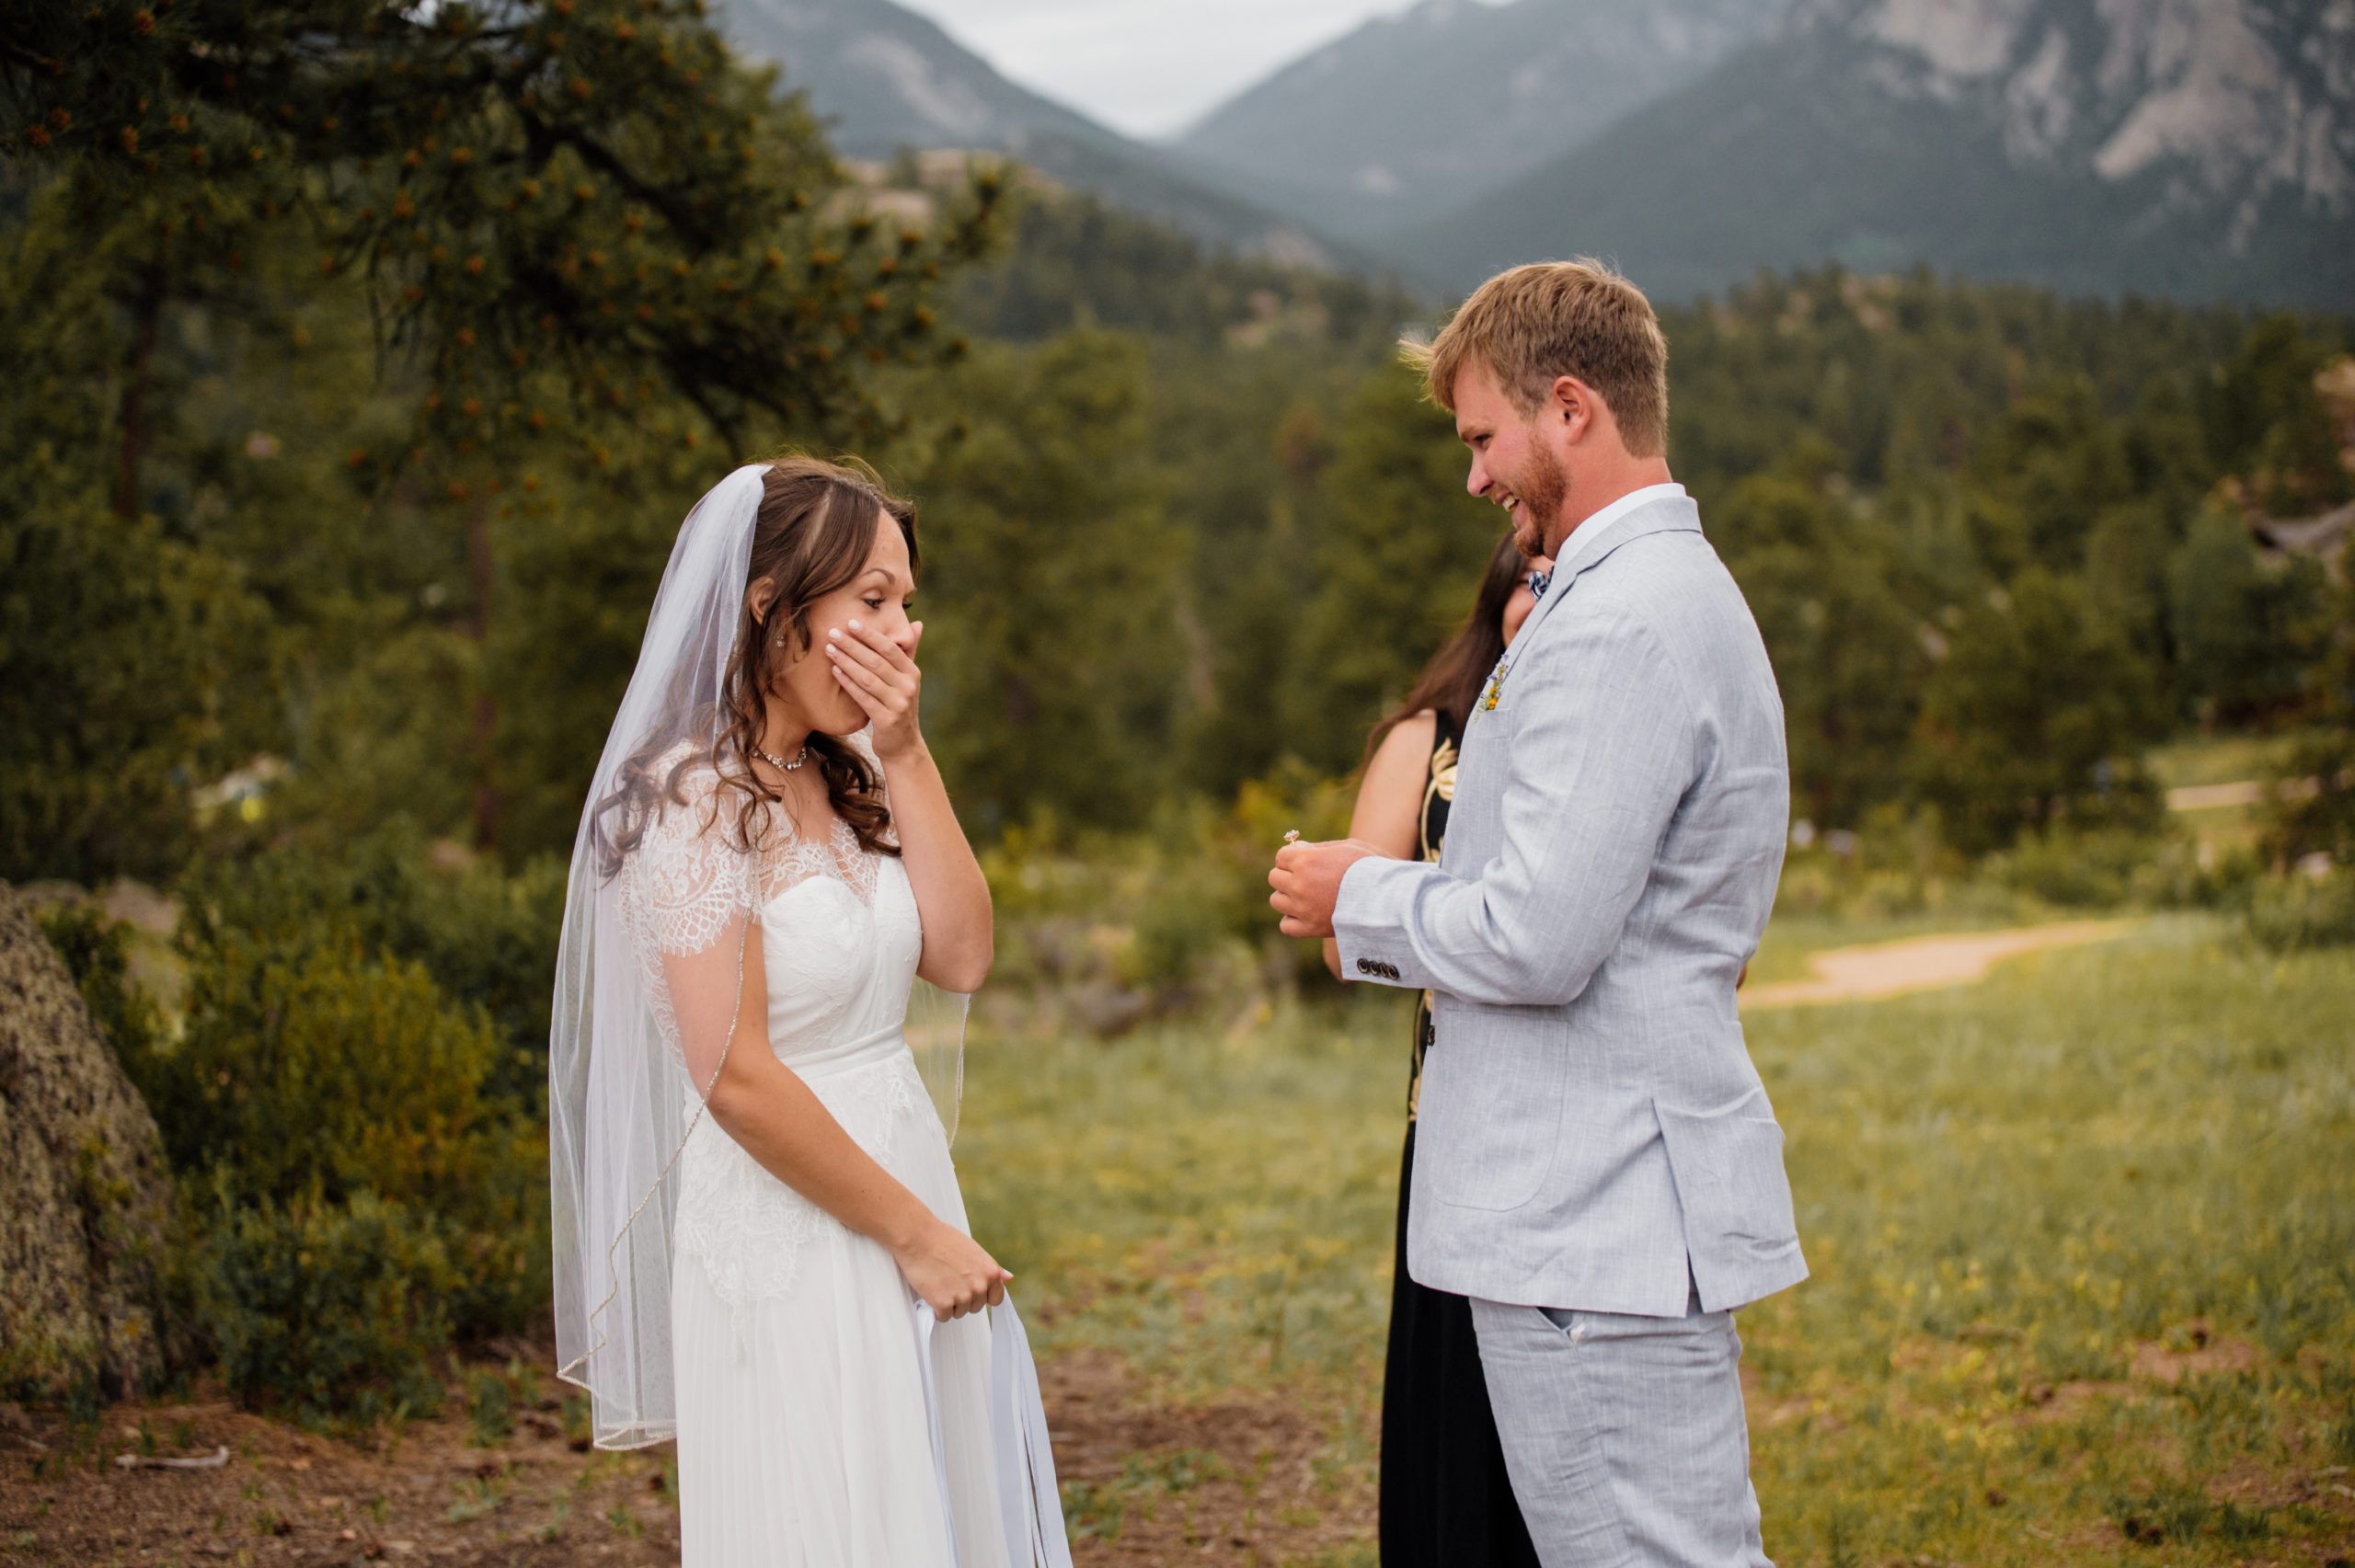 The groom surprises his bride with a gorgeous ring during their elopement ceremony at Knoll Willows in Estes Park.